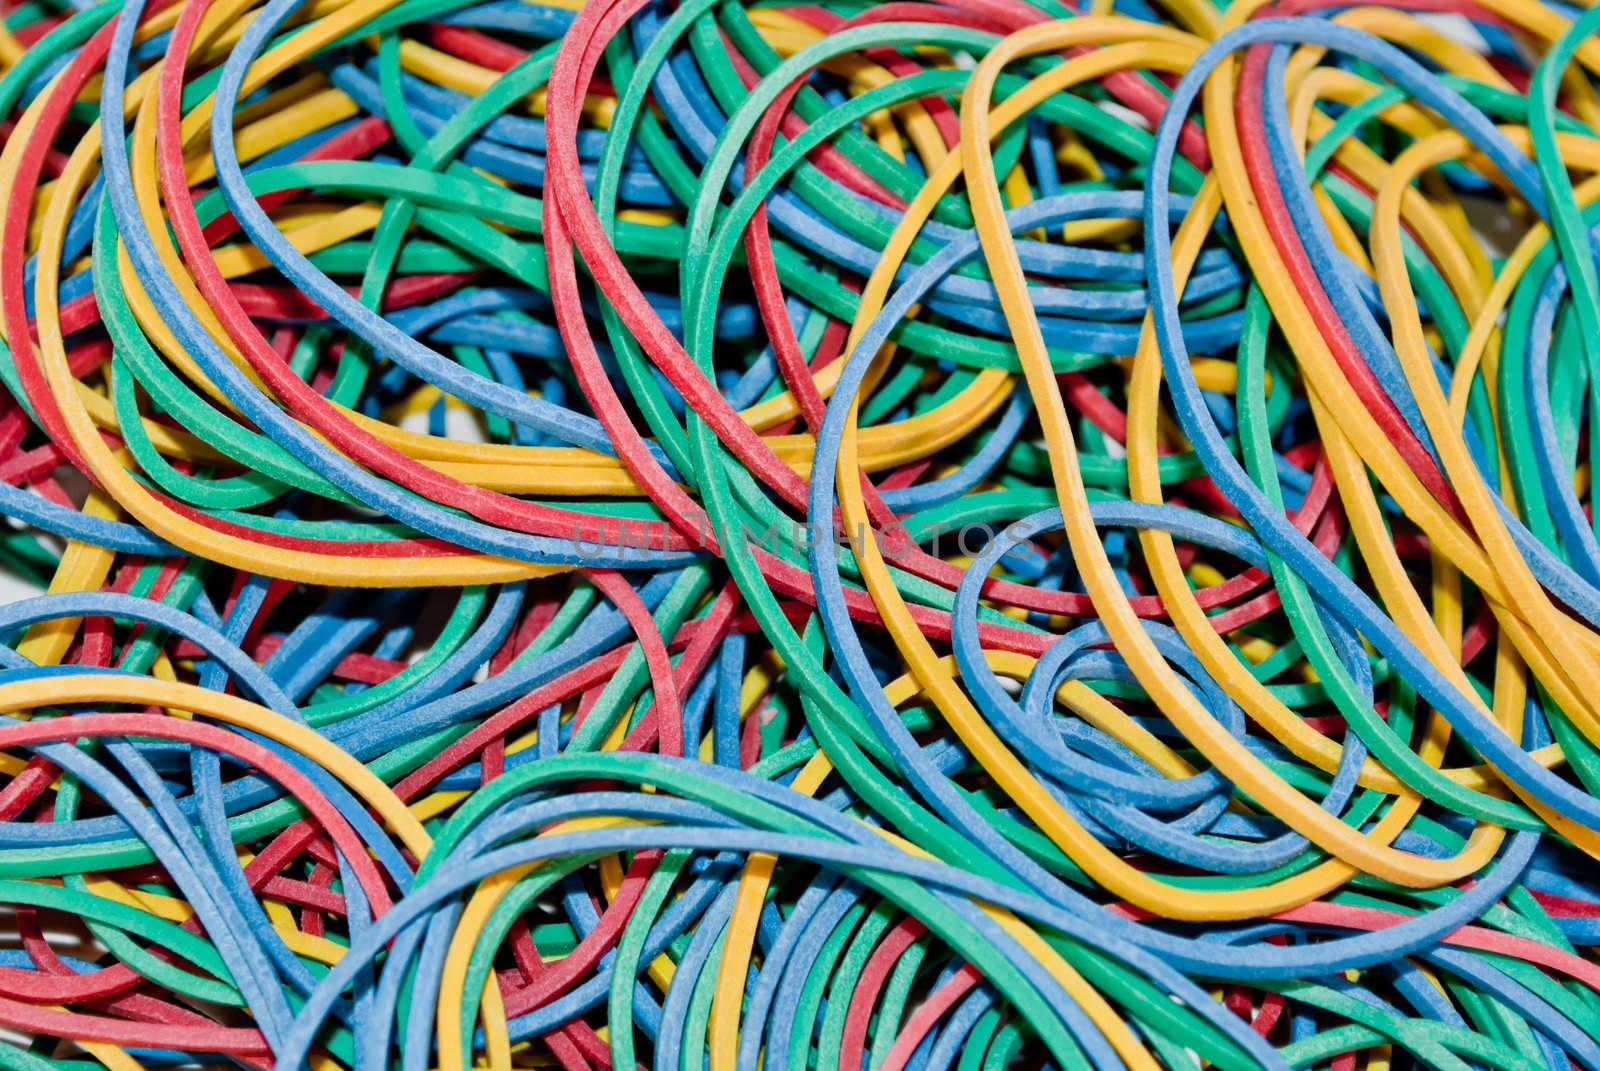 Background with a pile of colorful rubber elastics.